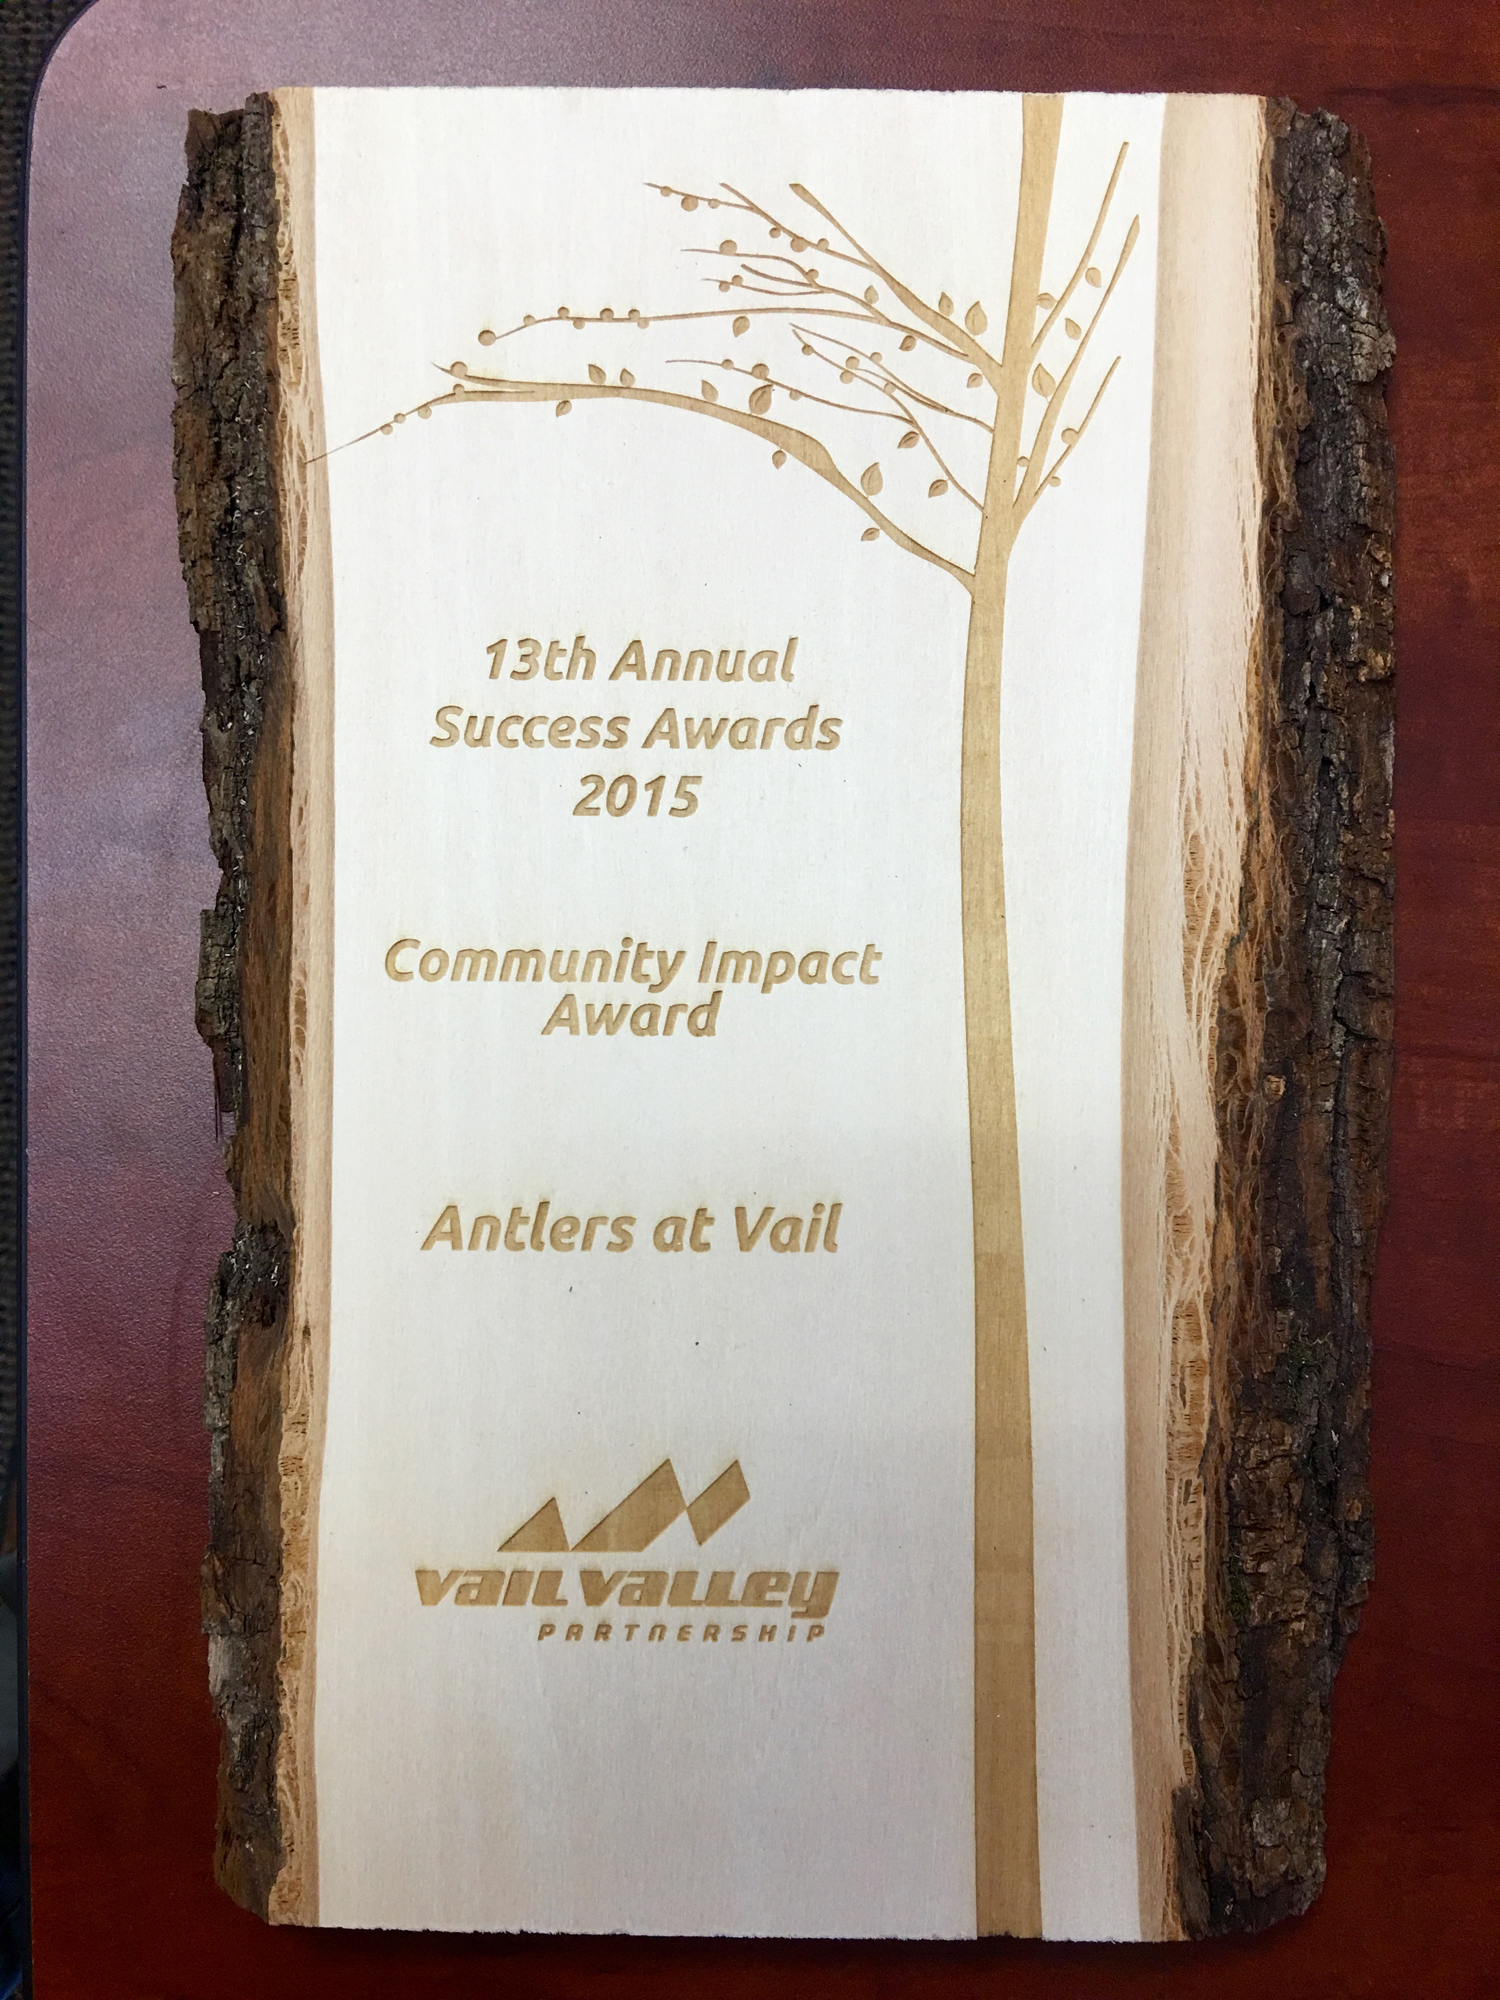 The Vail Valley Partnership recently honored Antlers at Vail hotel with its Community Impact Award during its 2016 Success Awards ceremony.